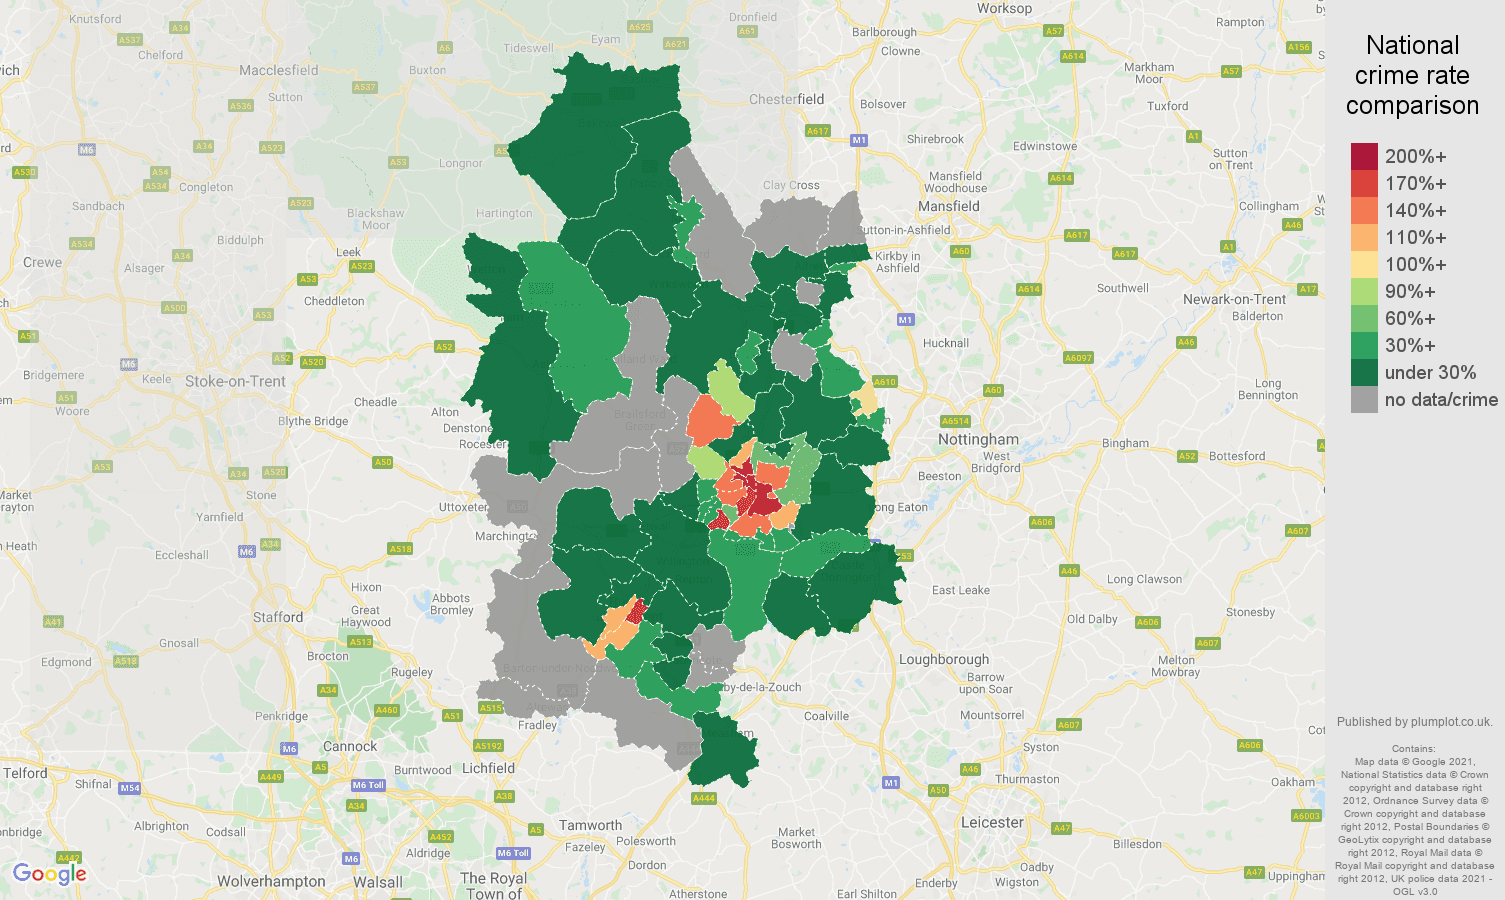 Derby bicycle theft crime rate comparison map